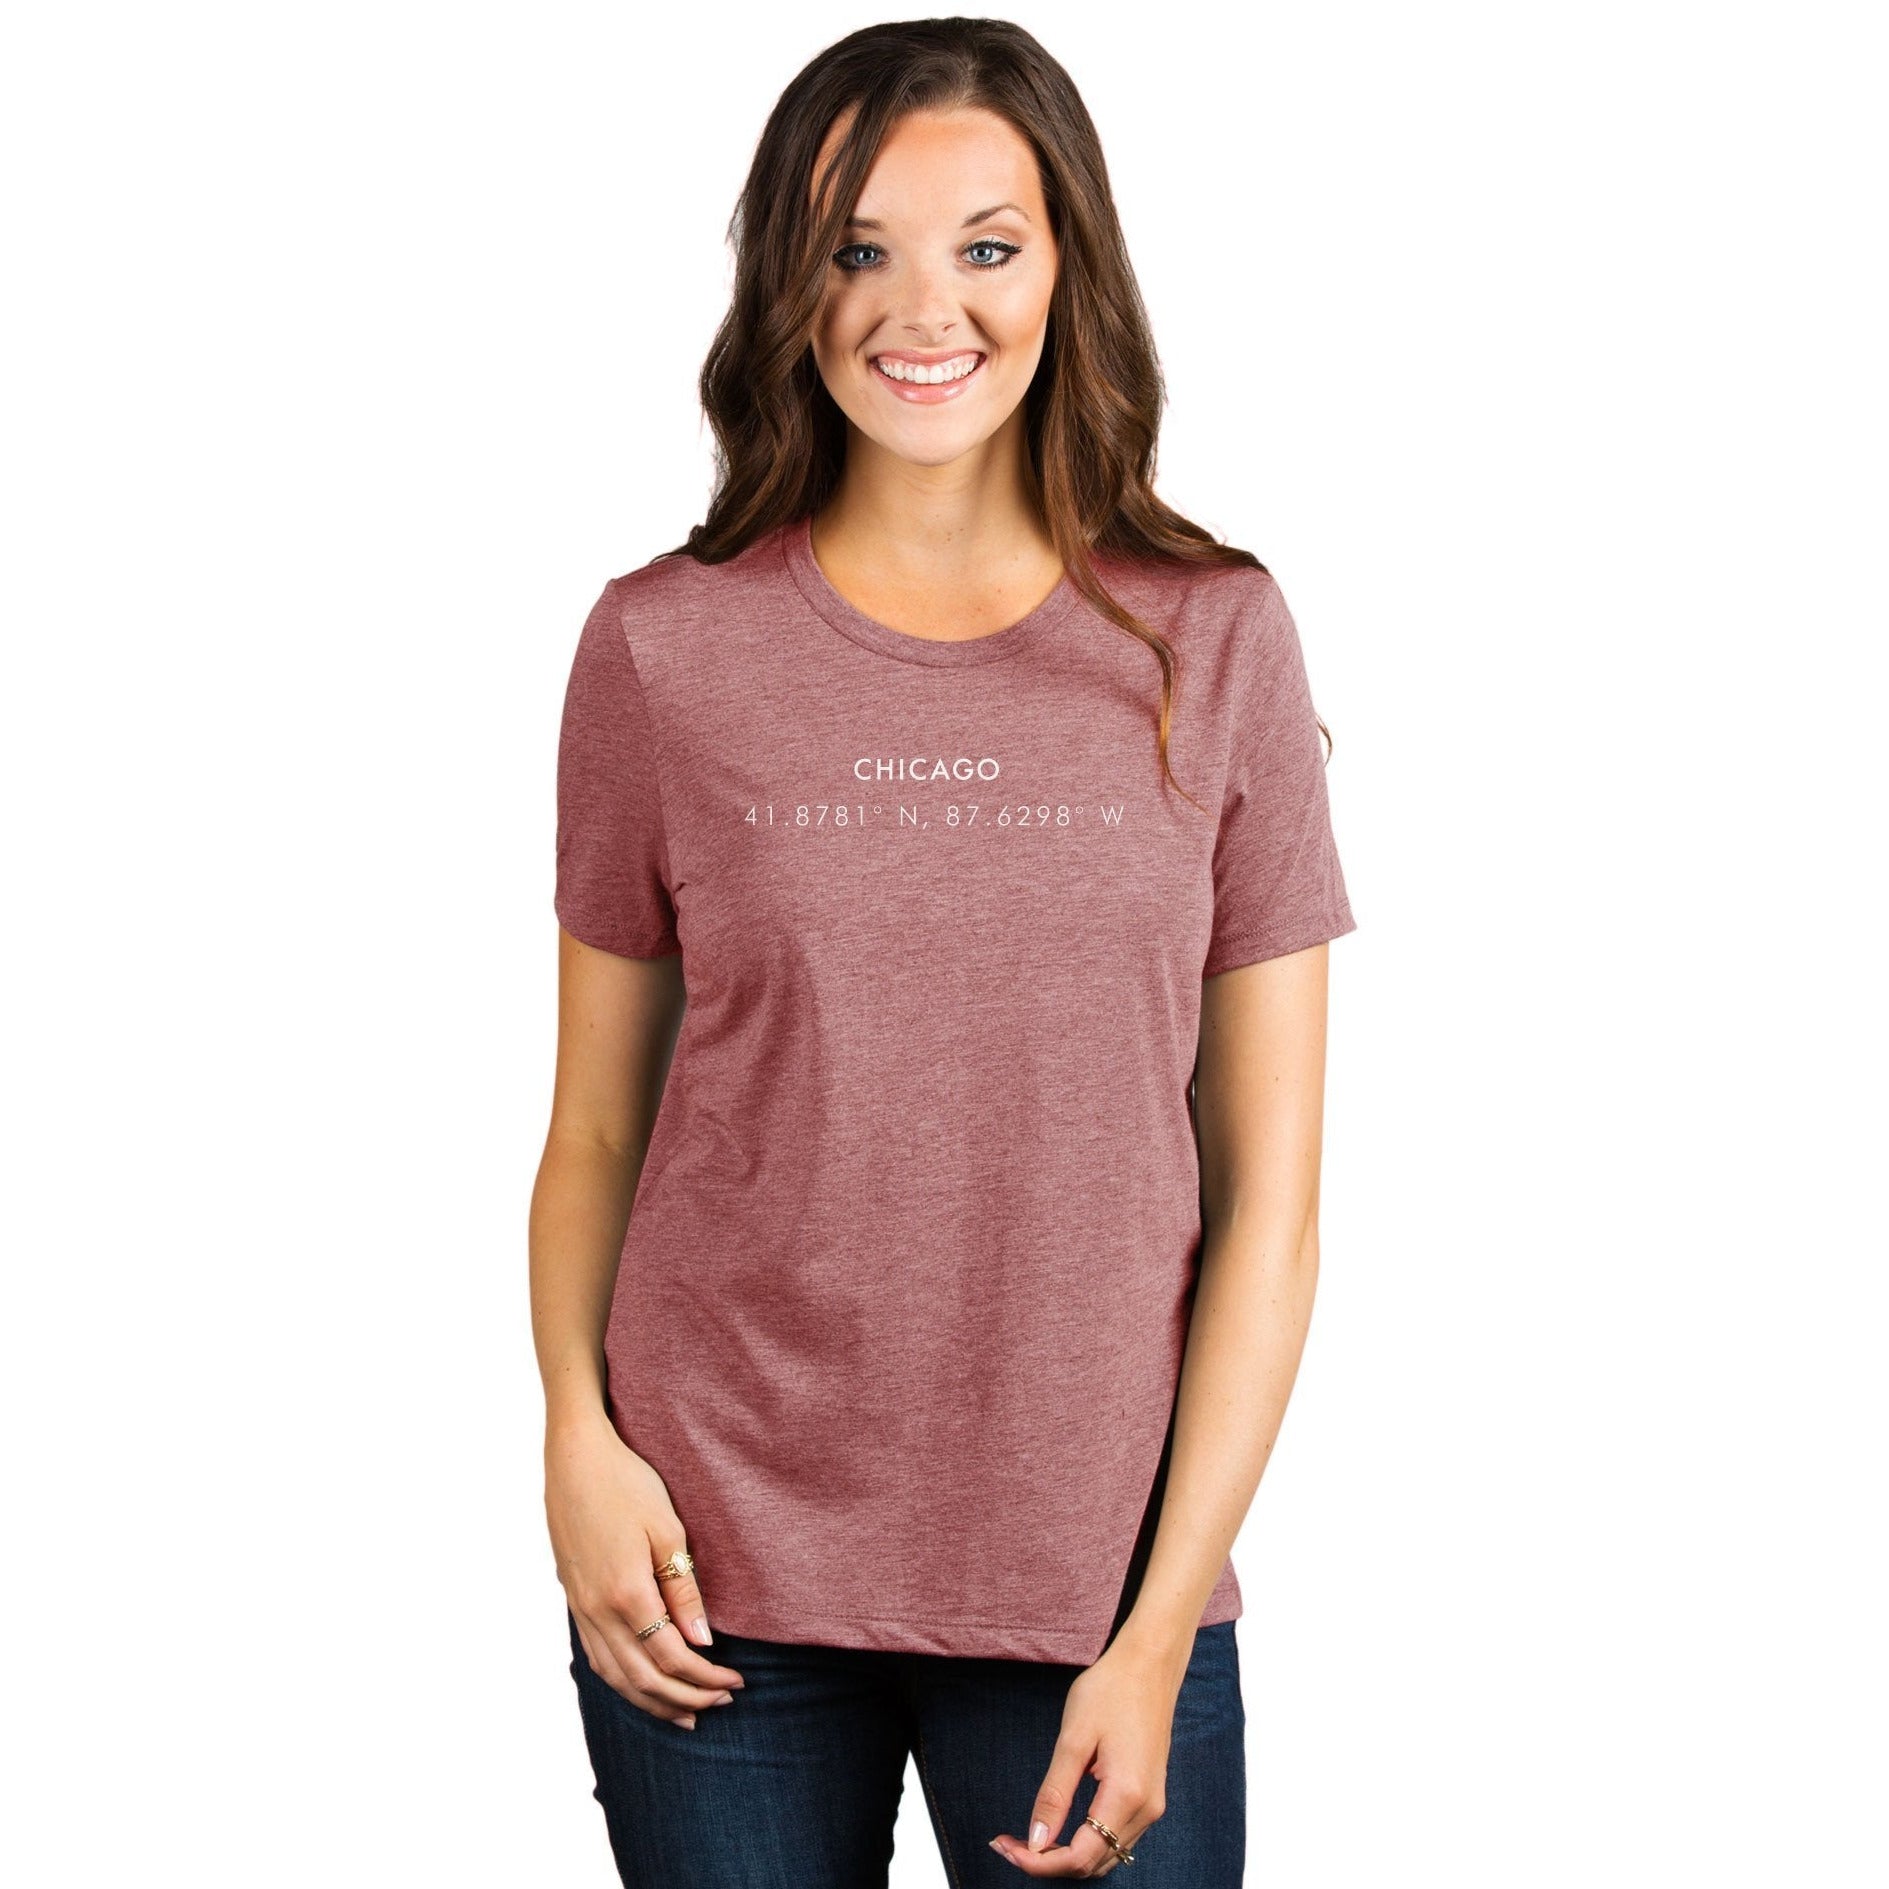 Chicago Illinois Coordinates Women's Relaxed Crewneck T-Shirt Top Tee Heather Rouge Model
